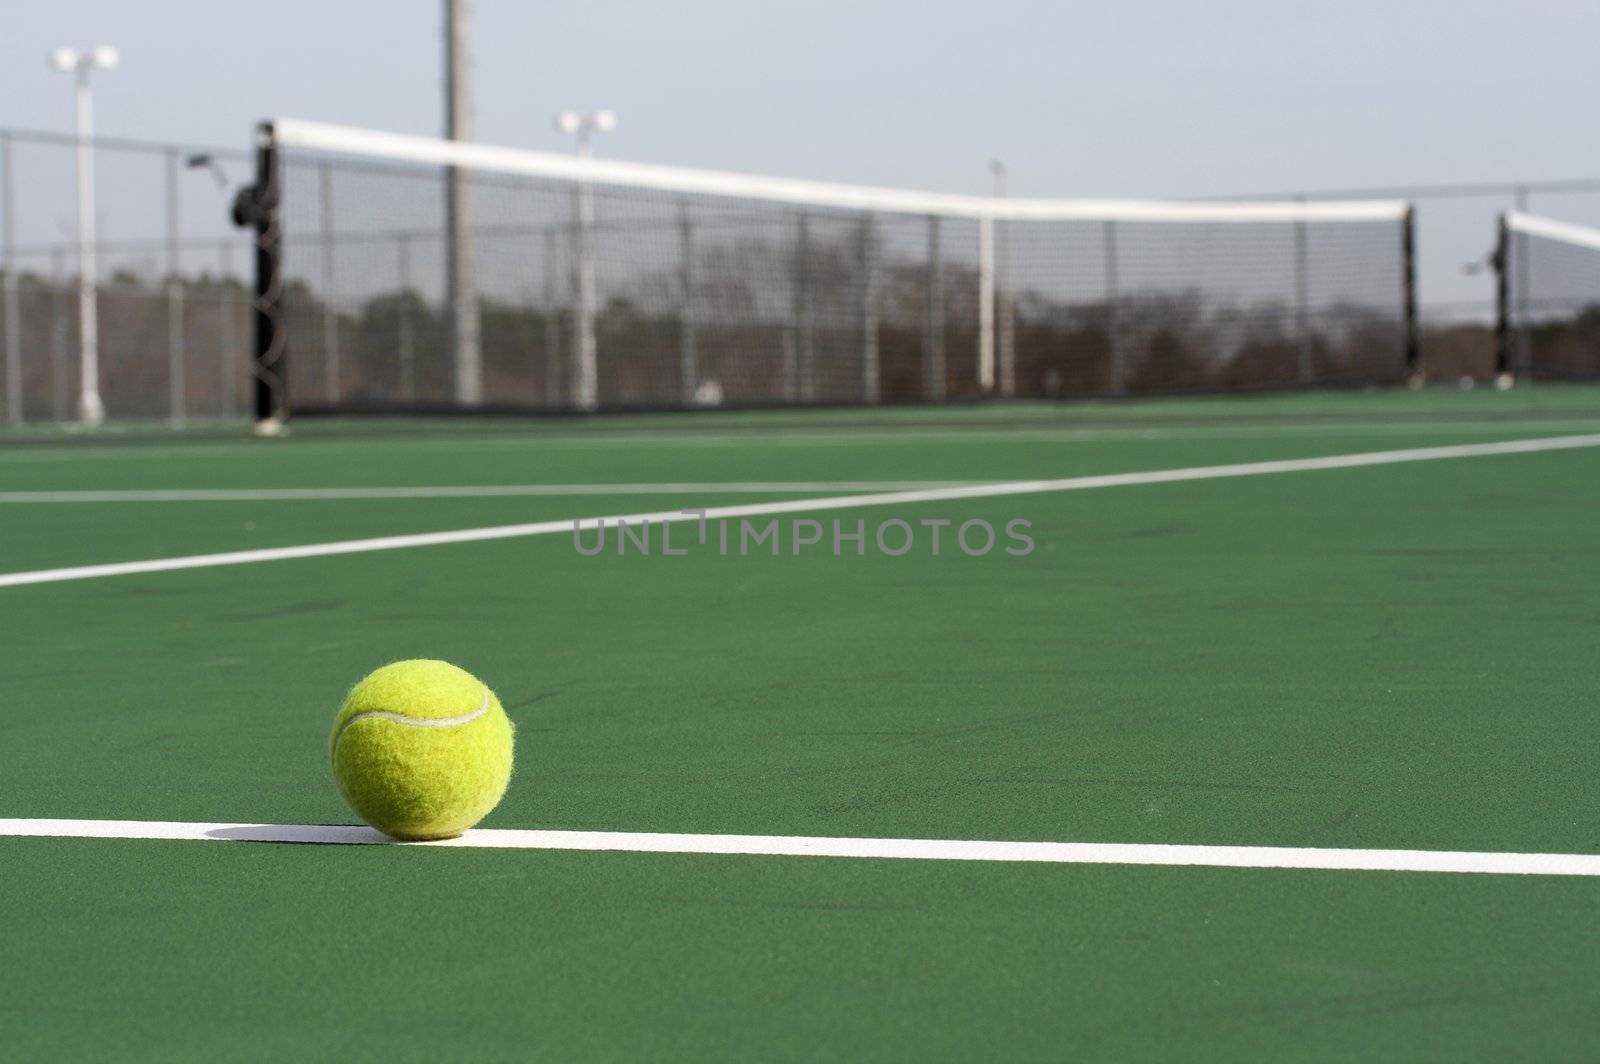 a picture of a tennis ball on the court